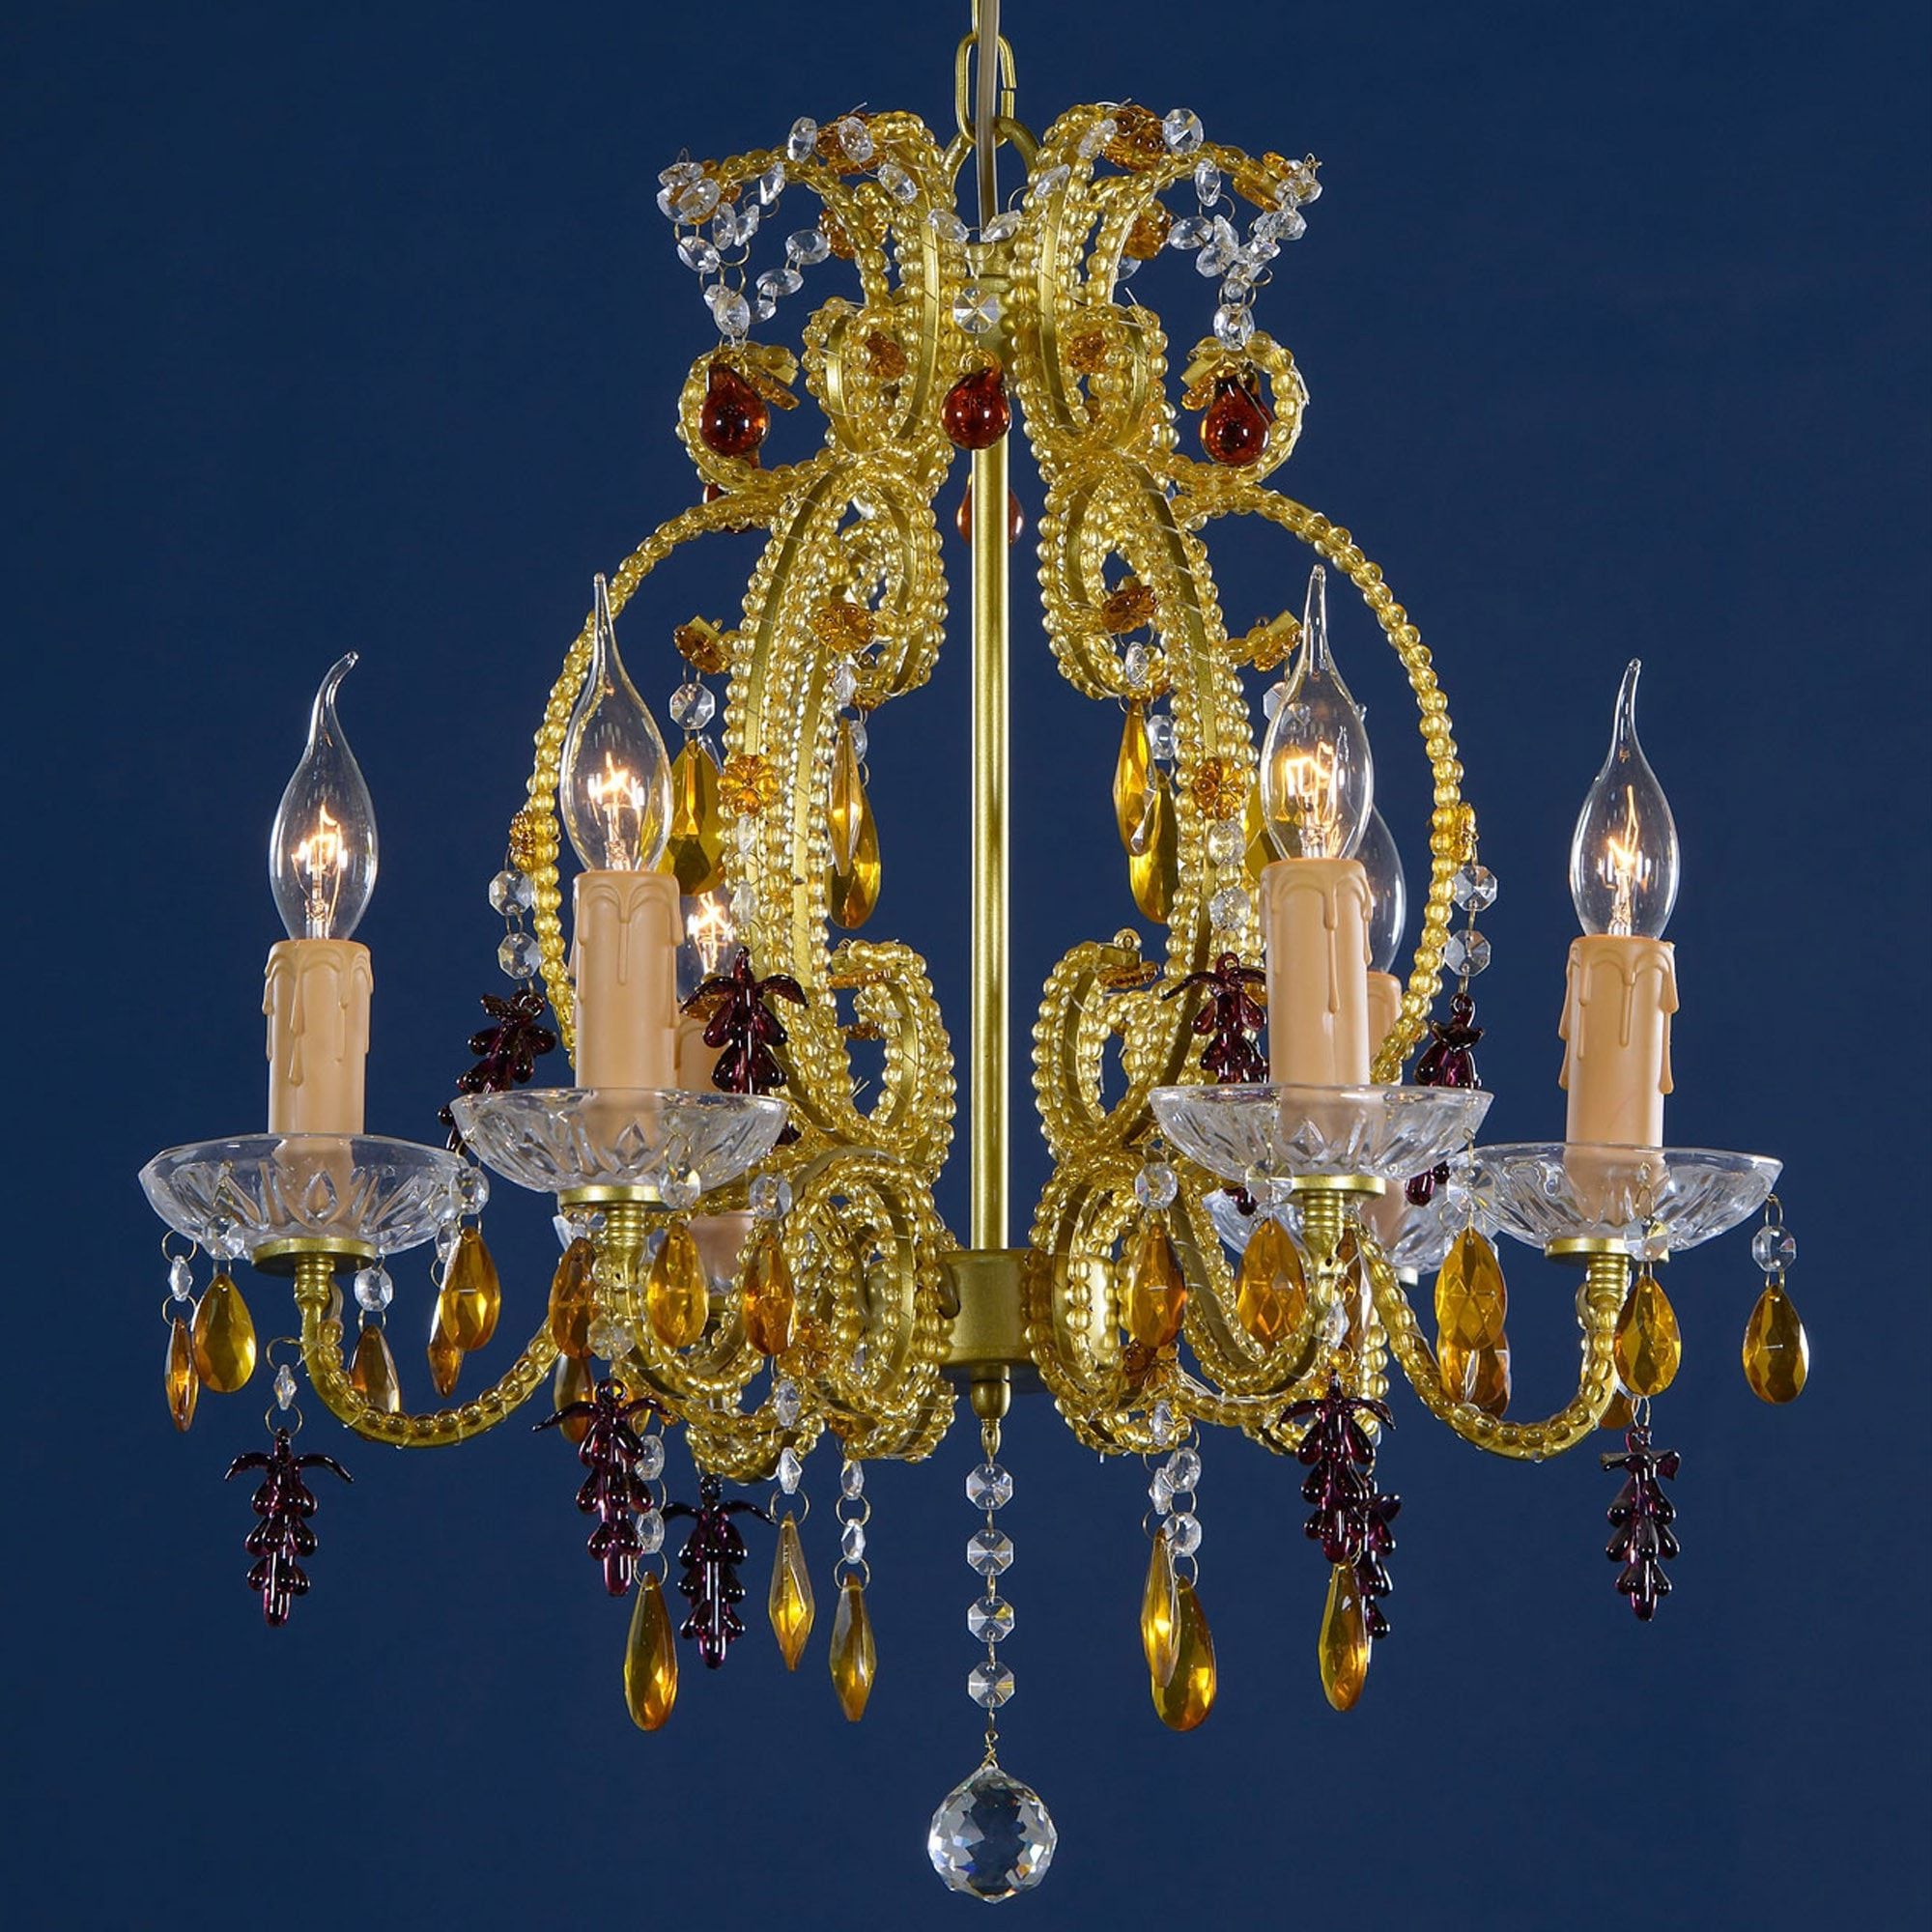 French Intended For Popular Antique Gold 18 Inch Four Light Chandeliers (View 18 of 20)